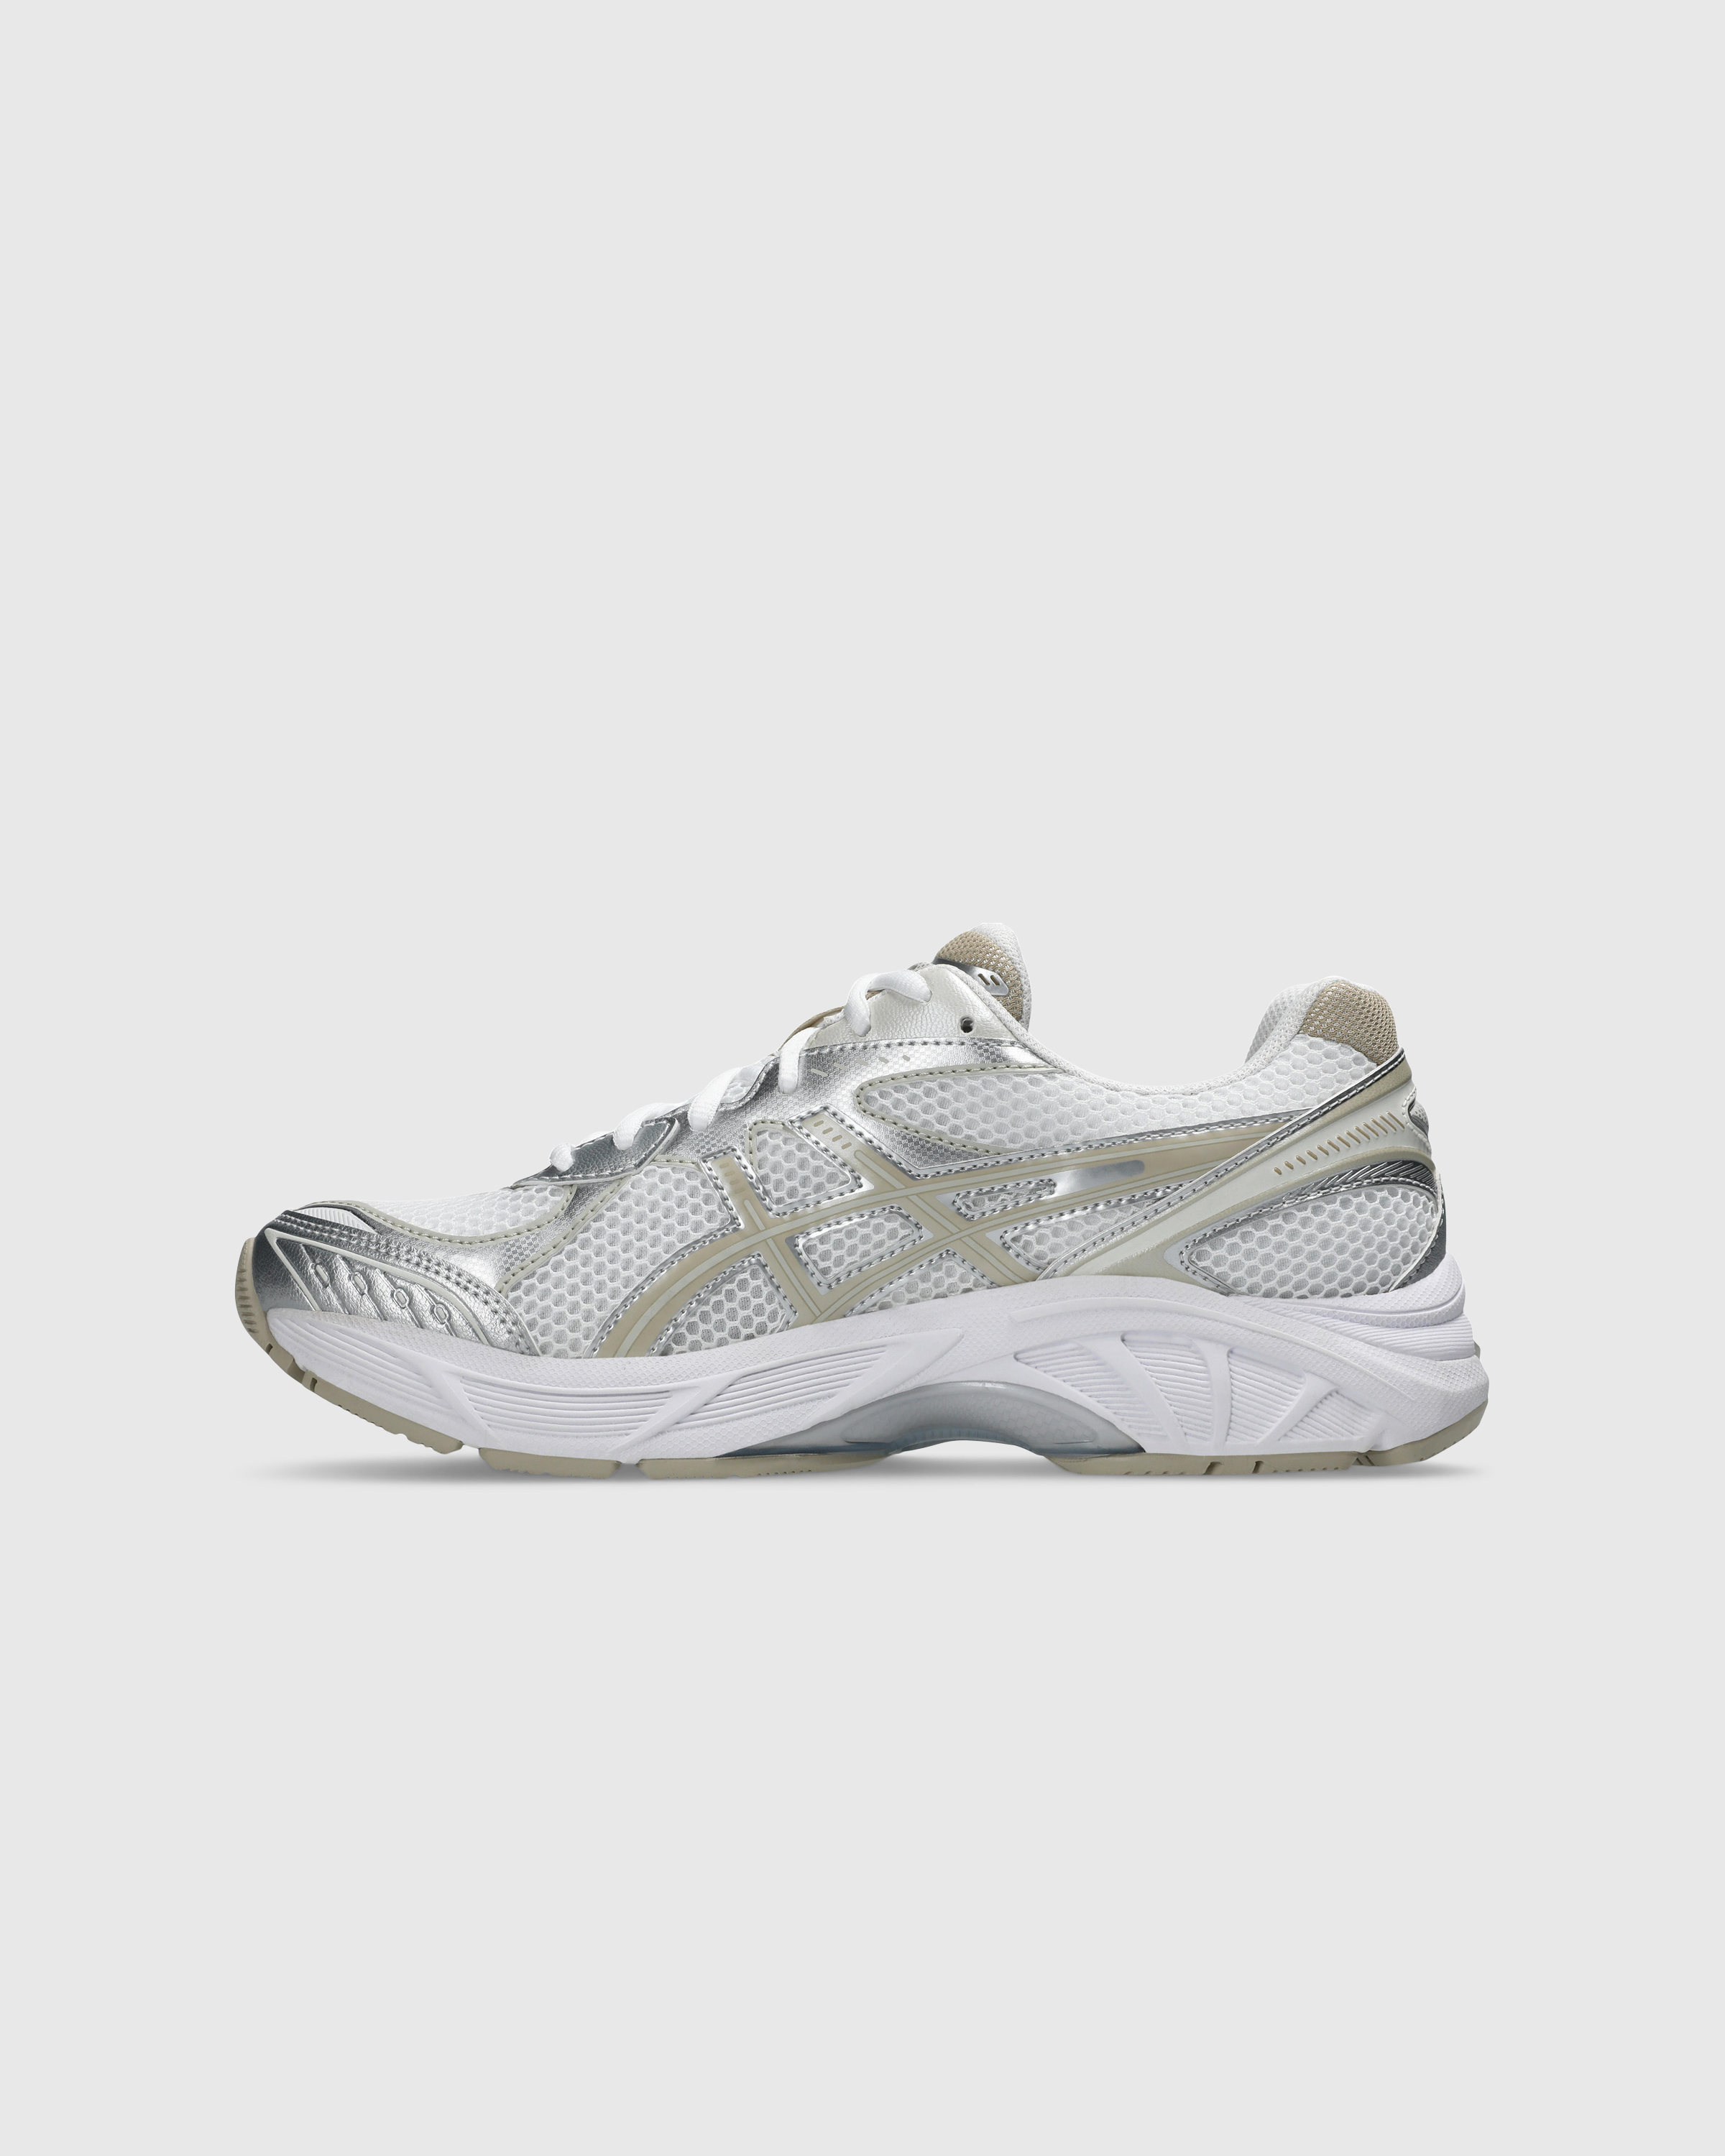 asics – GT-2160 White/Putty - Low Top Sneakers - White - Image 2